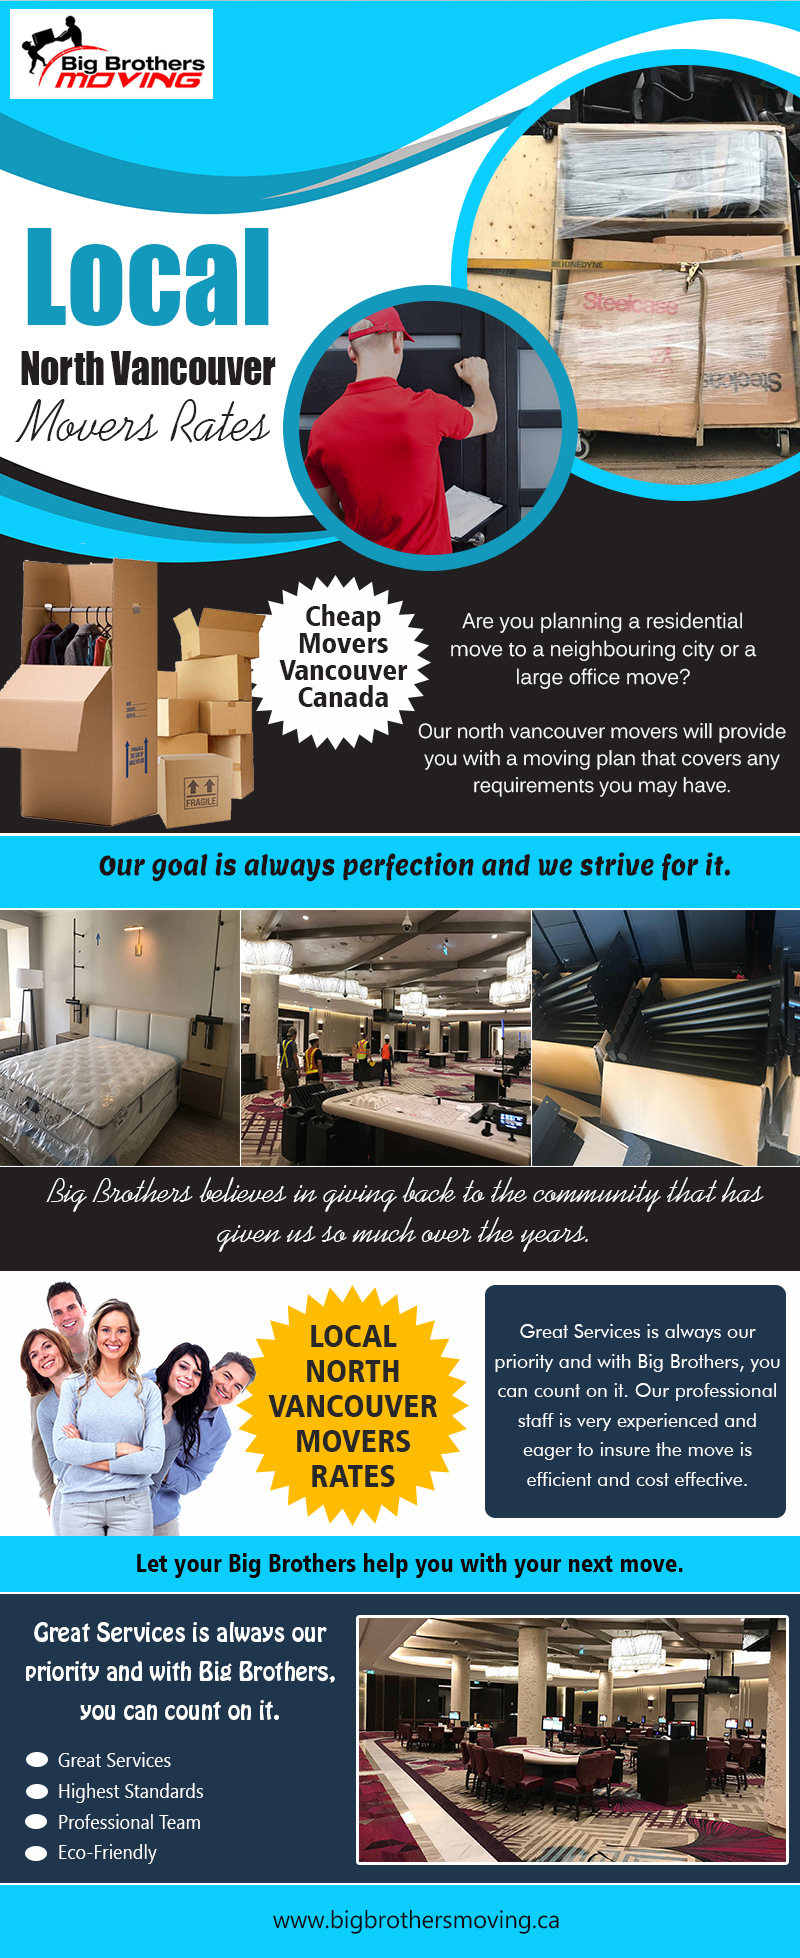 Local-North-Vancouver-Movers-Rates